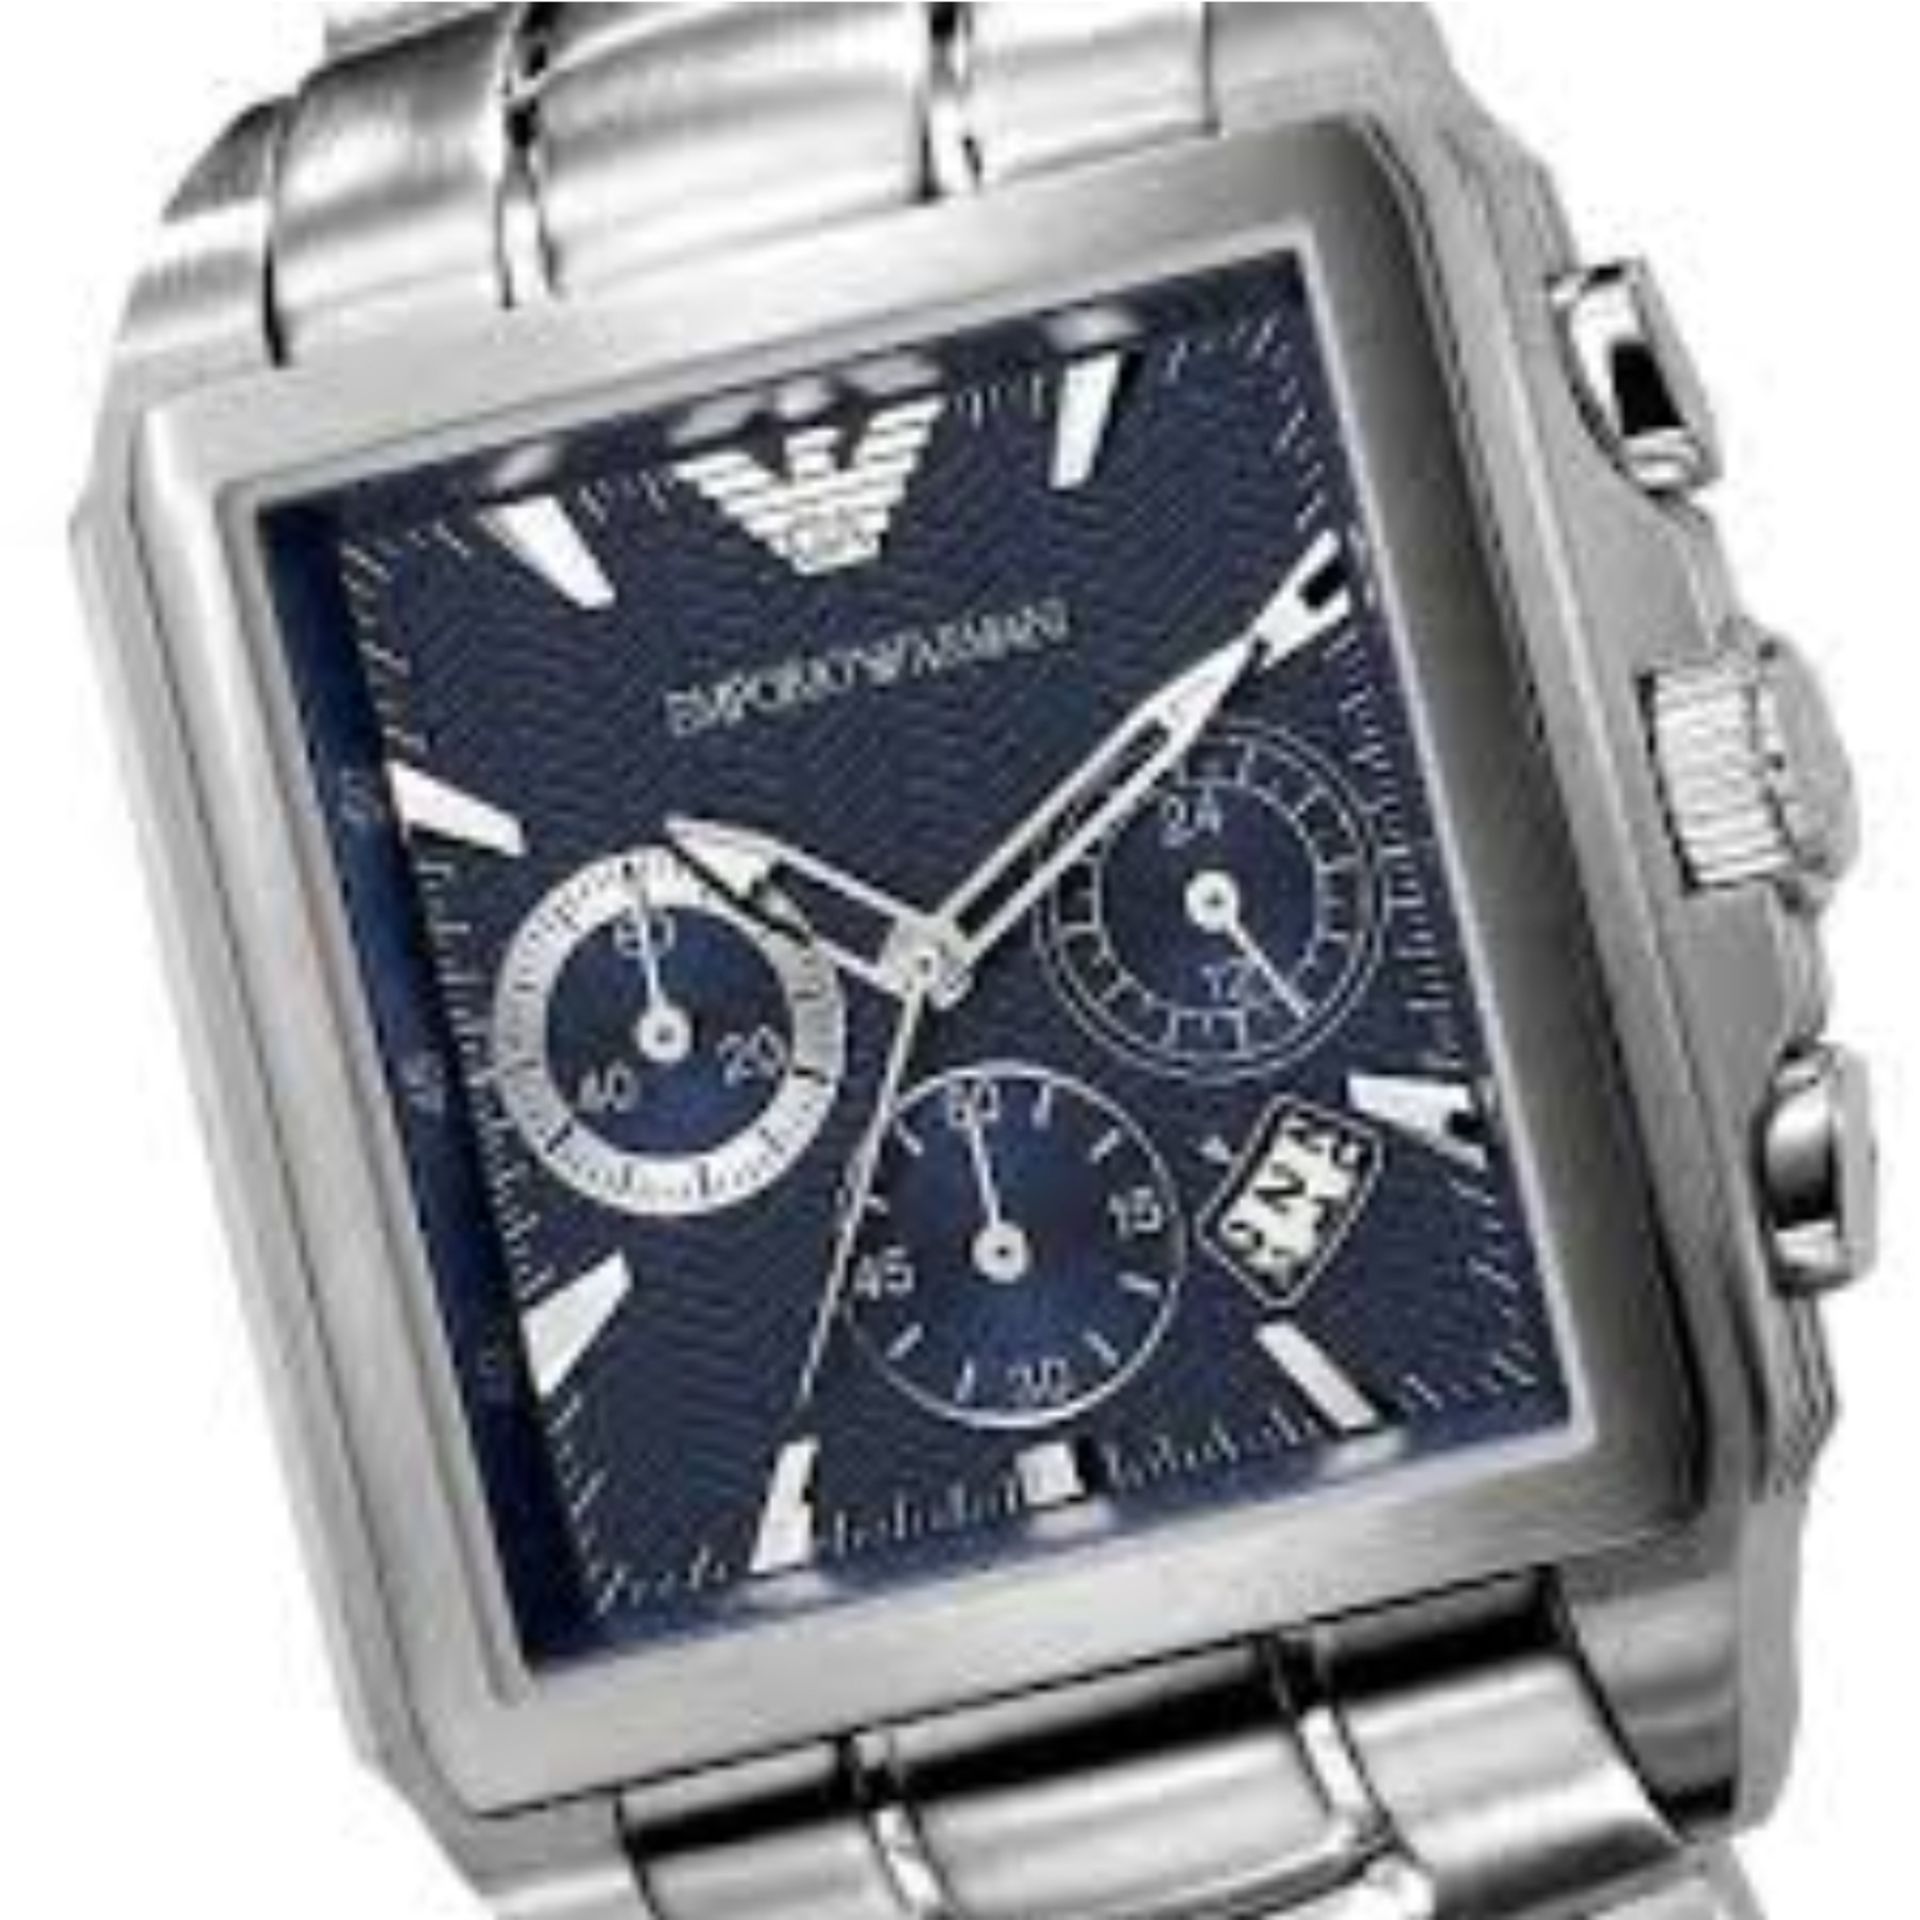 Emporio Armani AR0660 Men's Square Dial Silver Stainless Steel Bracelet Chronograph Watch - Image 3 of 5